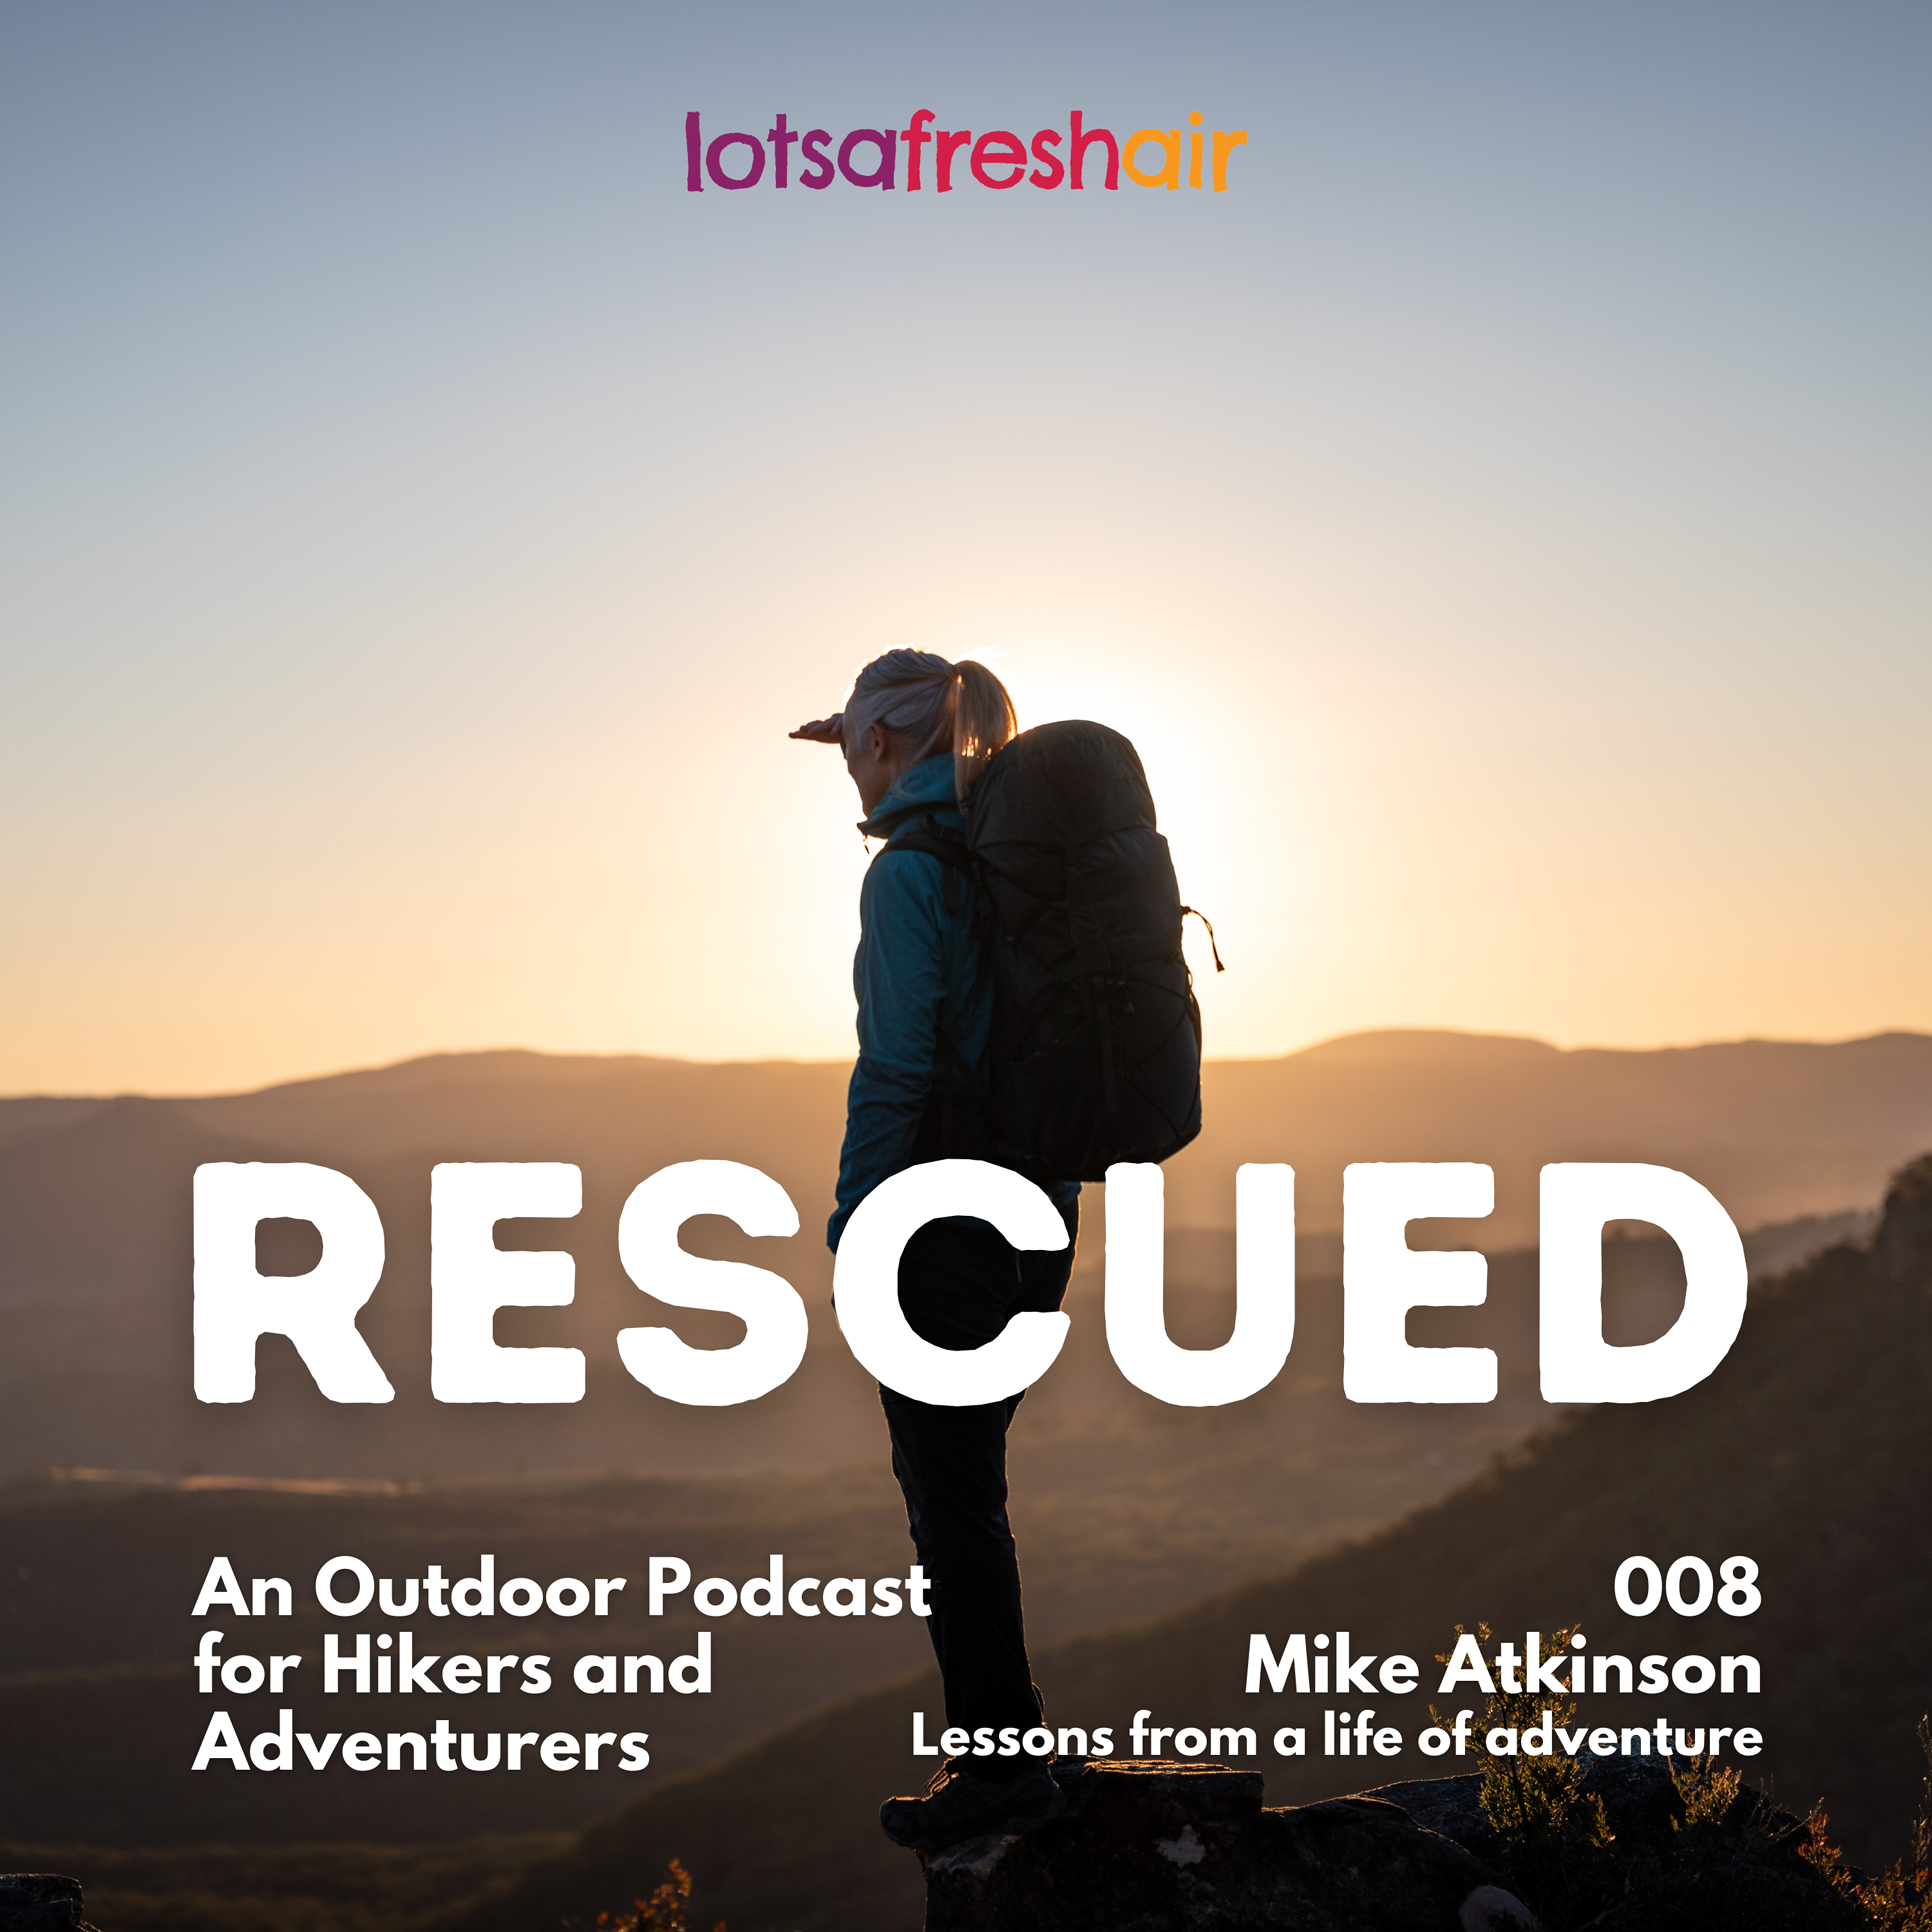 008 // Outback Mike (Atkinson) - Lessons from a Life of Adventure